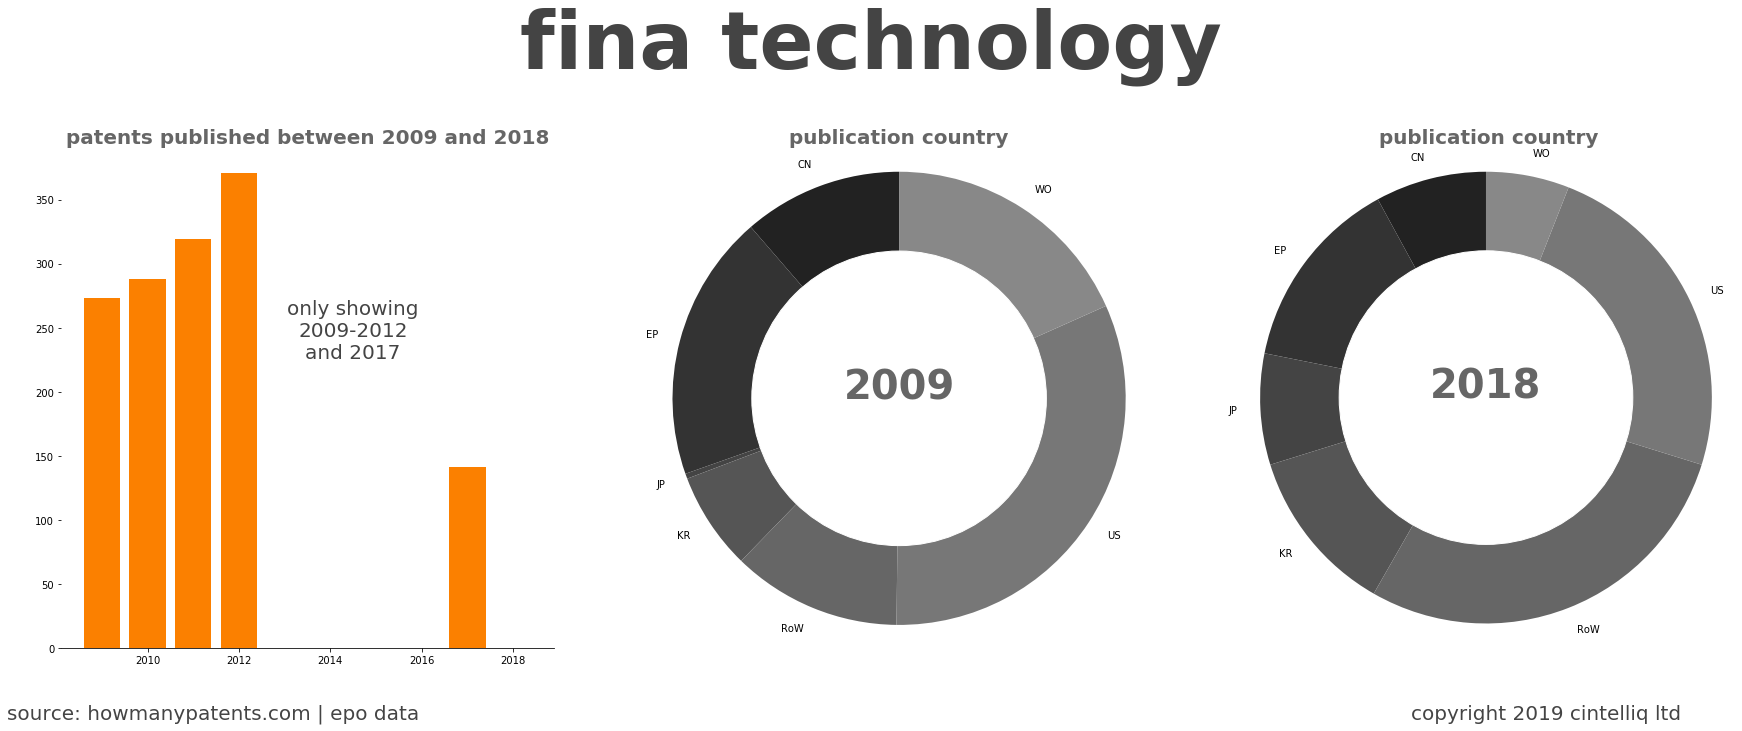 summary of patents for Fina Technology